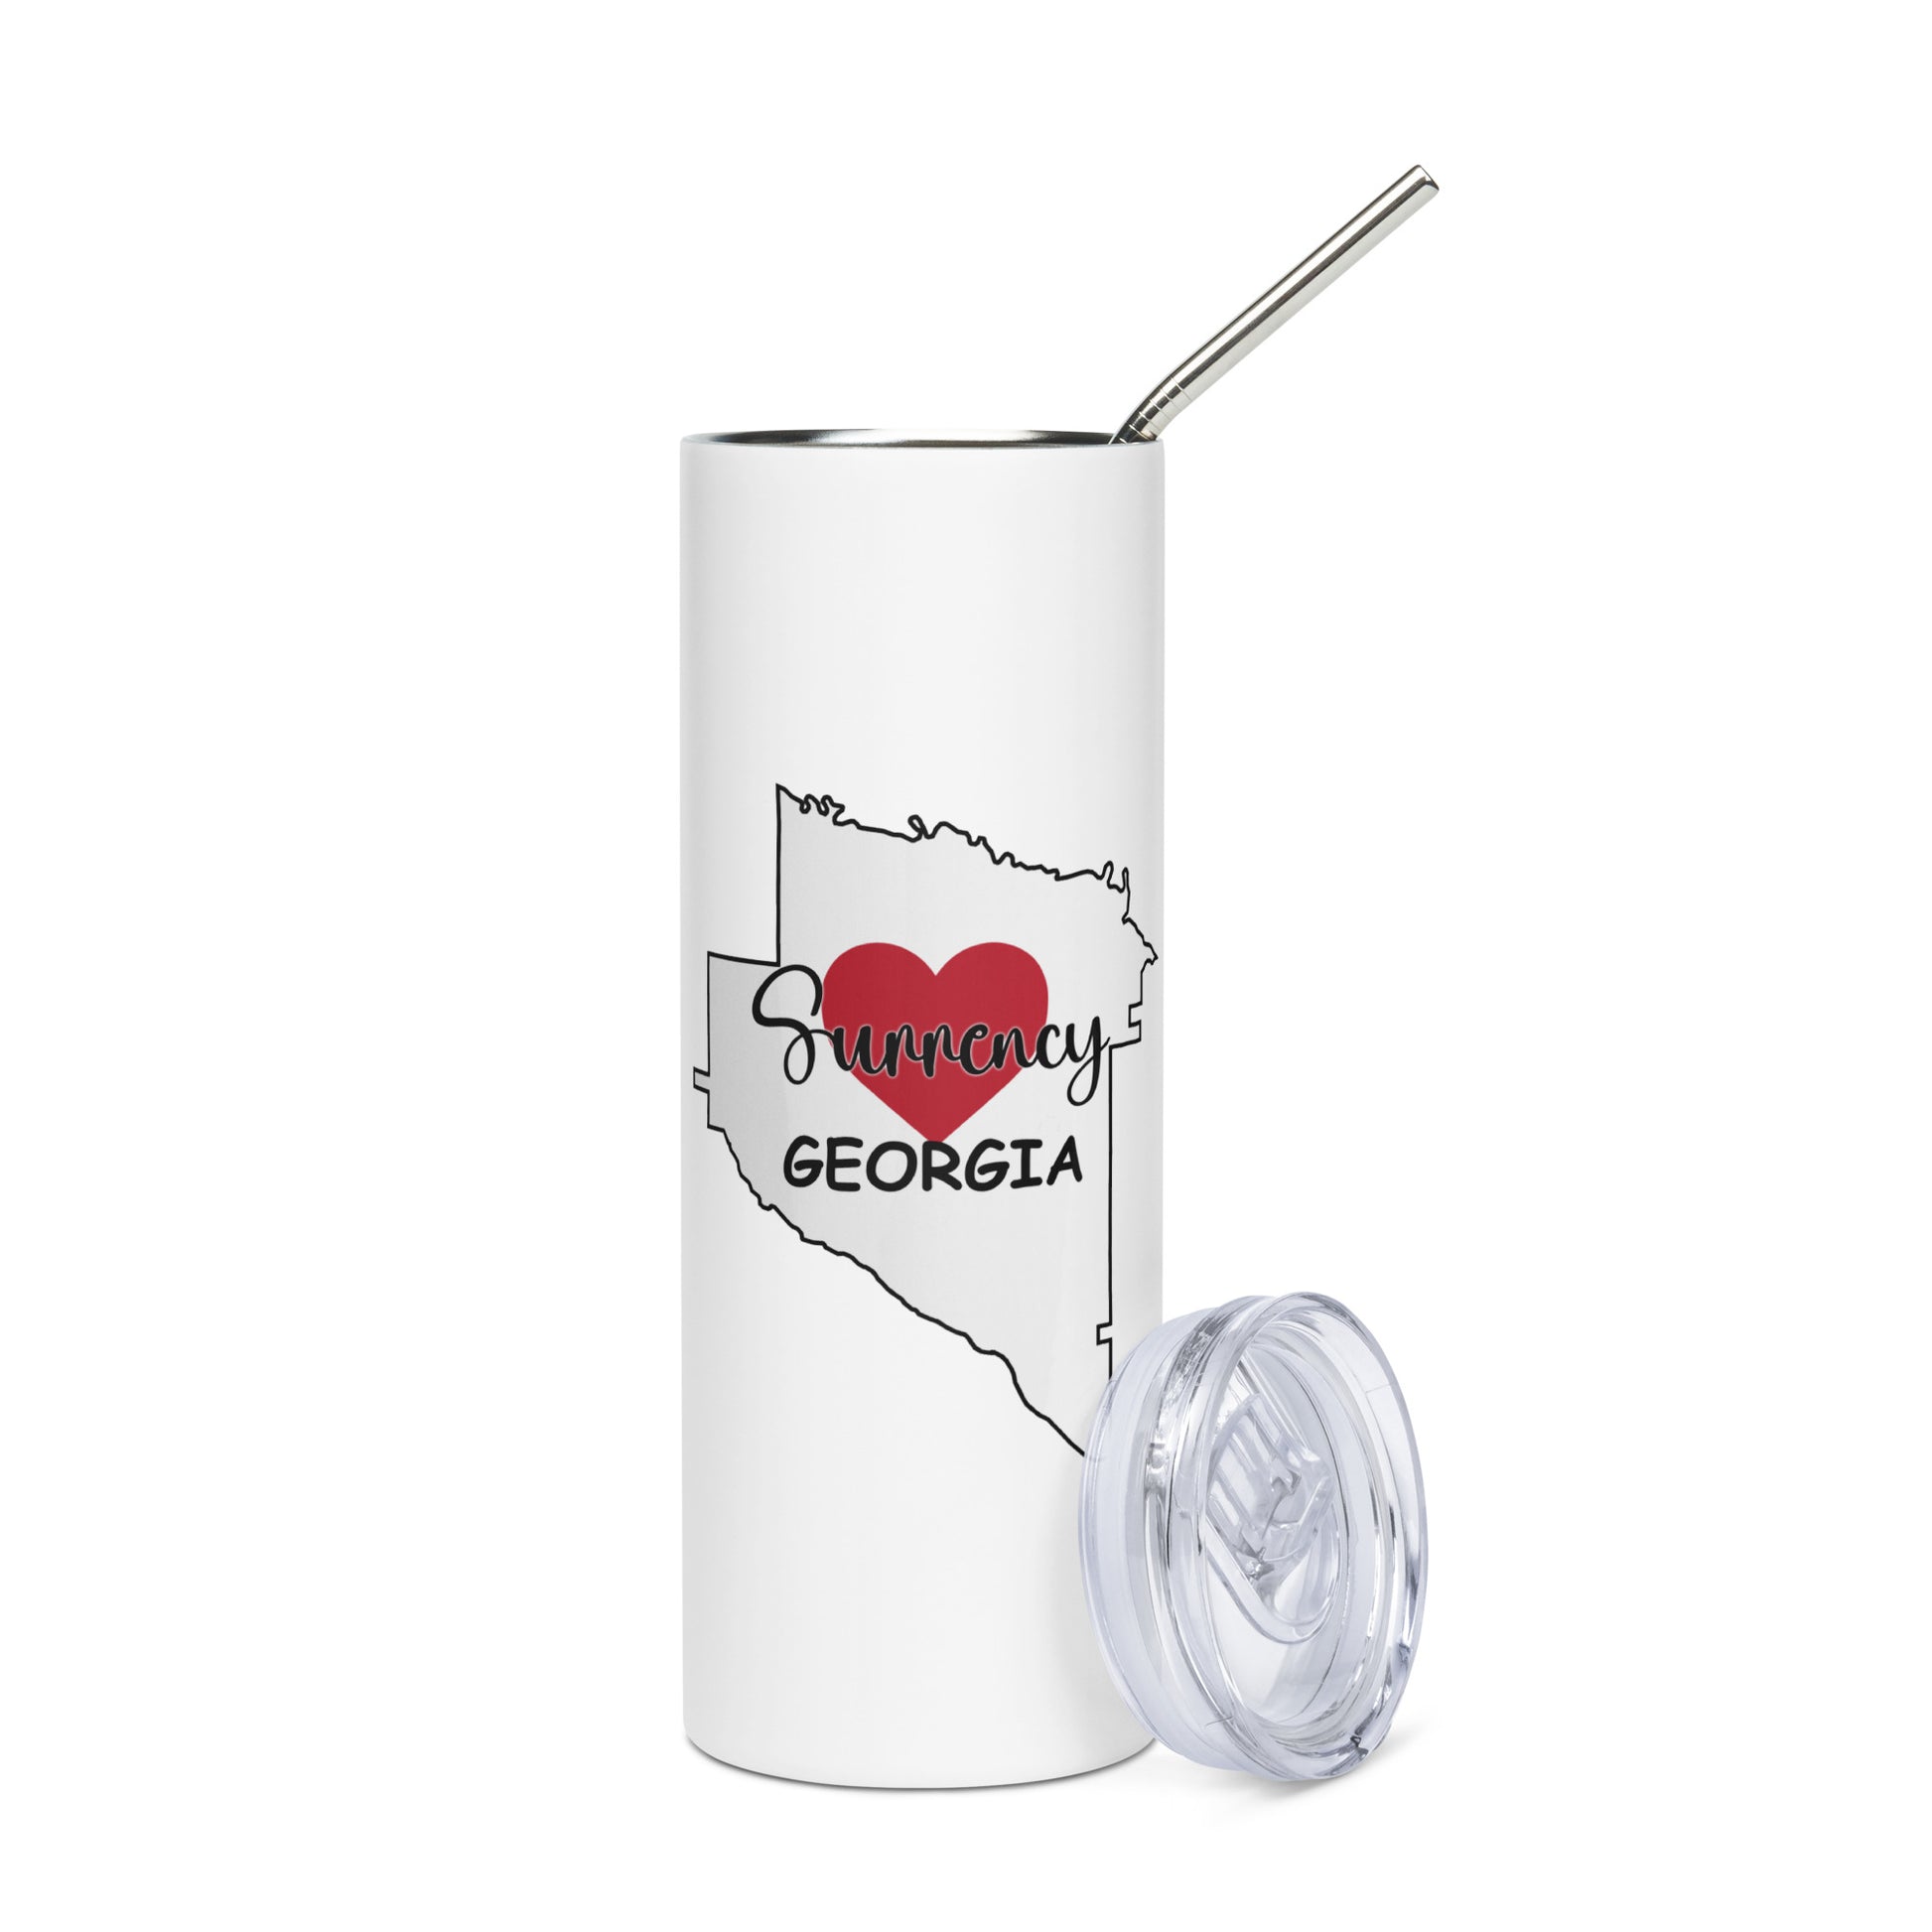 Surrency Georgia GA Heart in County Outline Stainless Steel Tumbler 20 oz (600 ml)